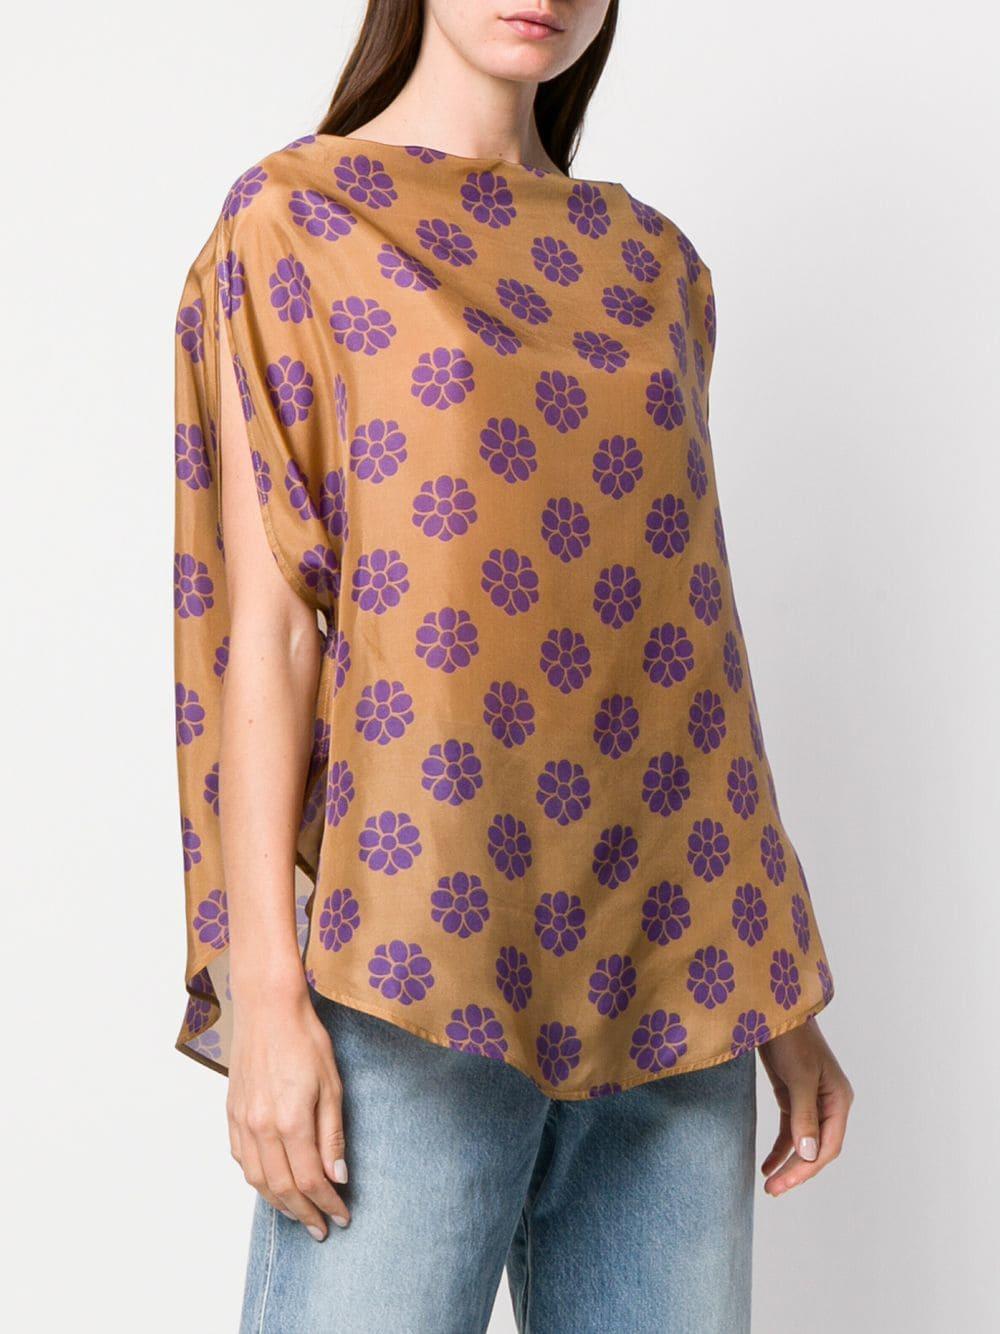 MM6 by Maison Martin Margiela Floral Pattern Slit Blouse in Brown - Lyst